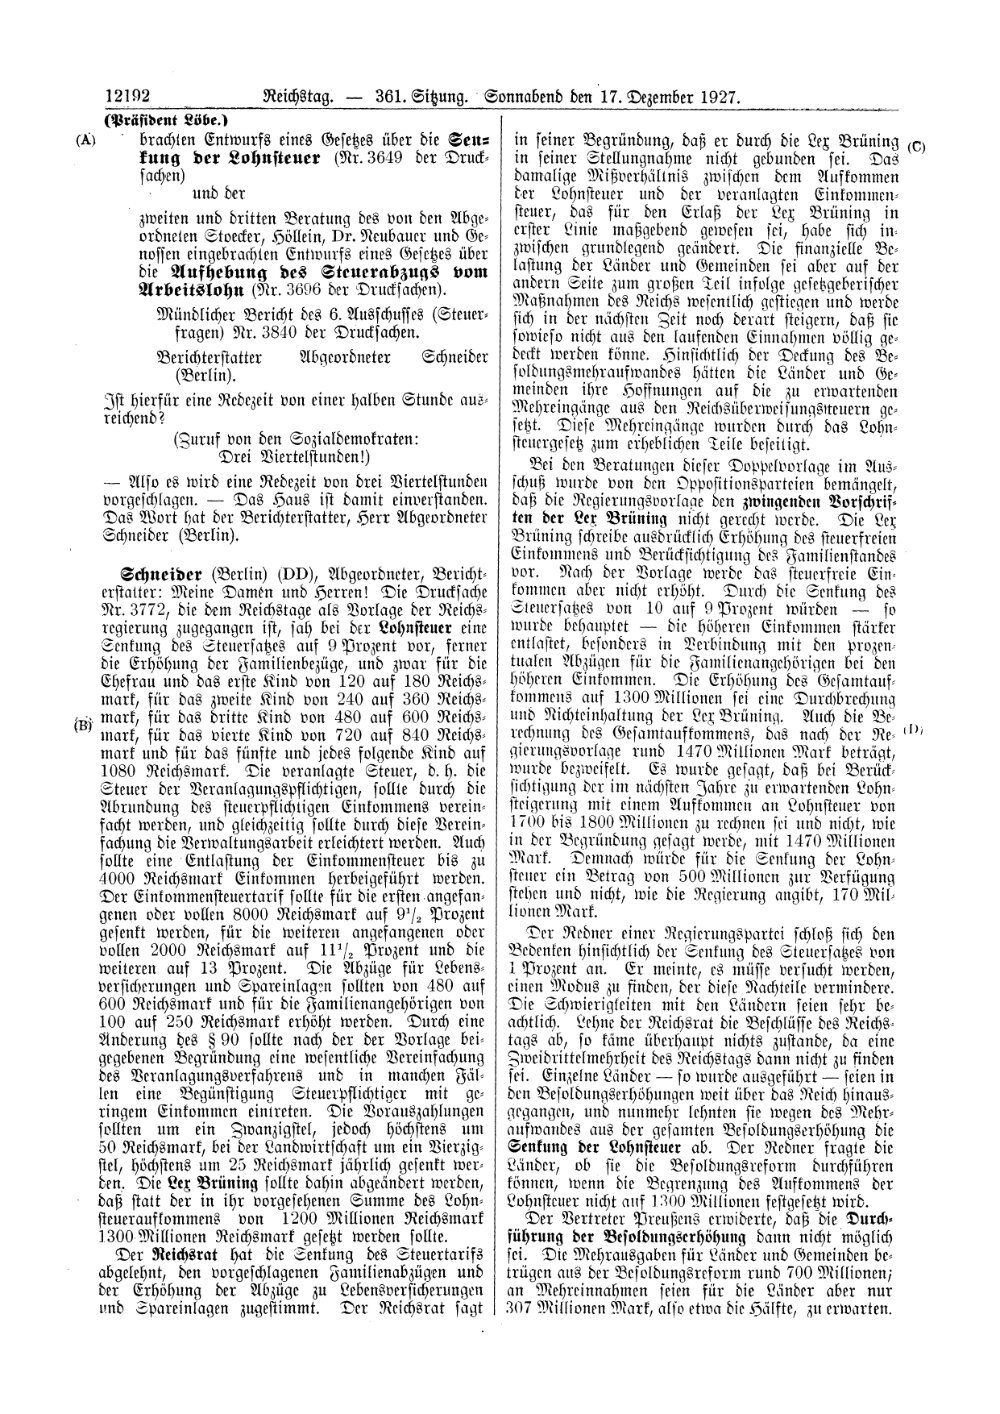 Scan of page 12192